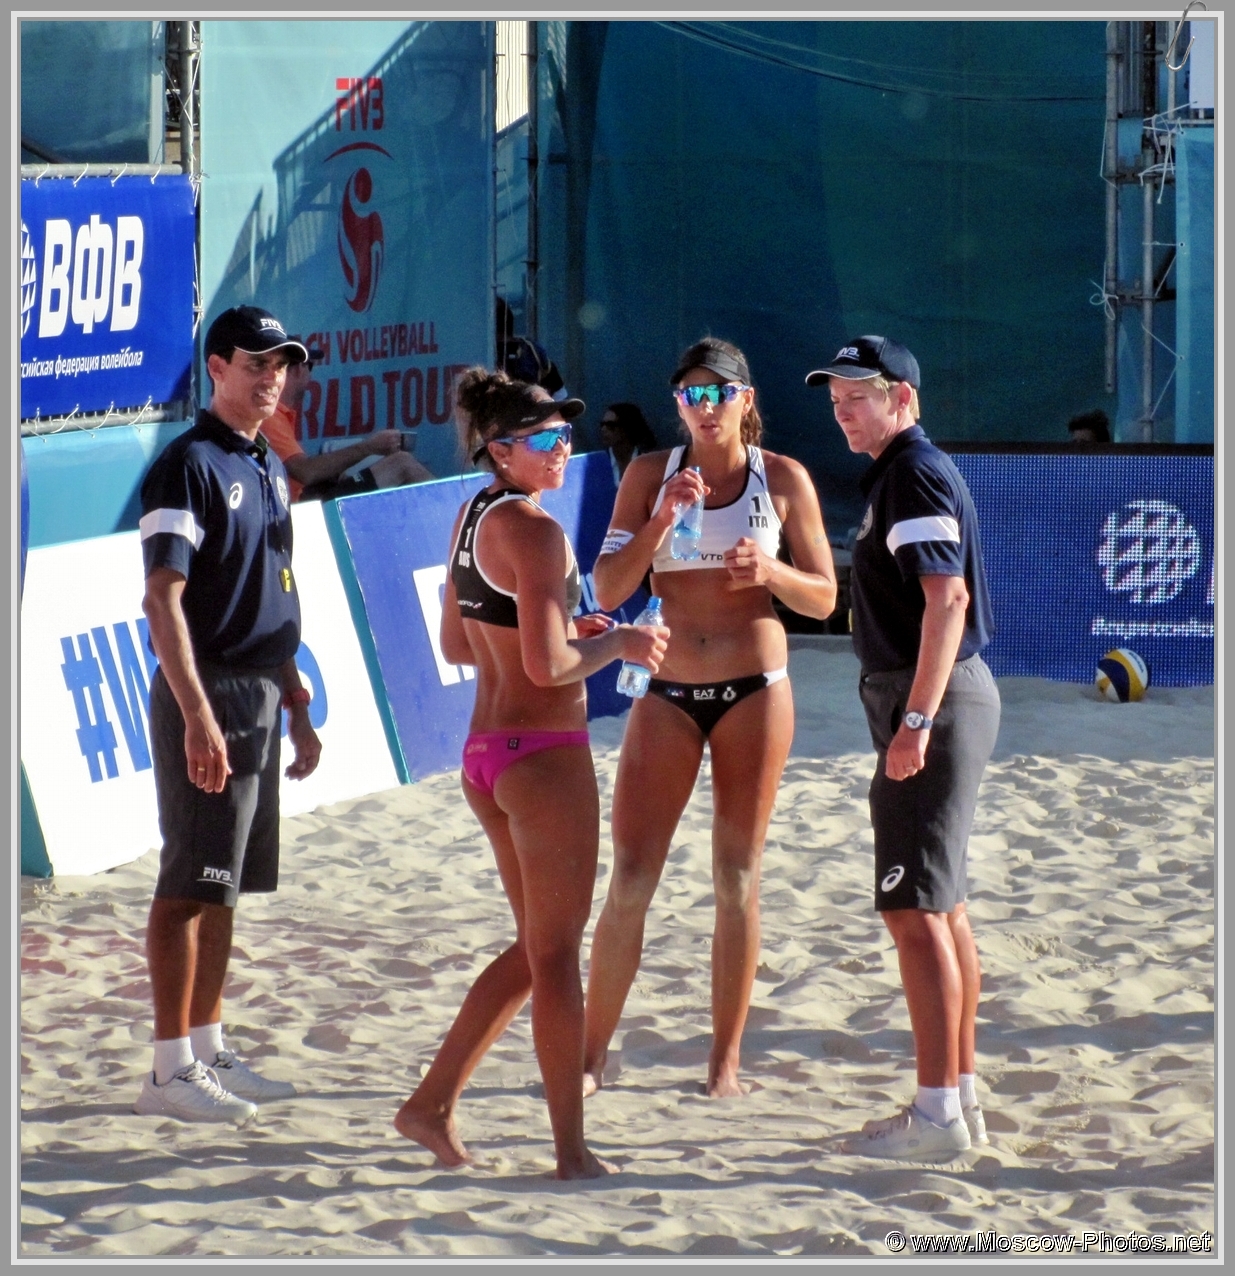 Marta Menegatti at FIVB Beach Volleyball World Tour in Moscow 2018